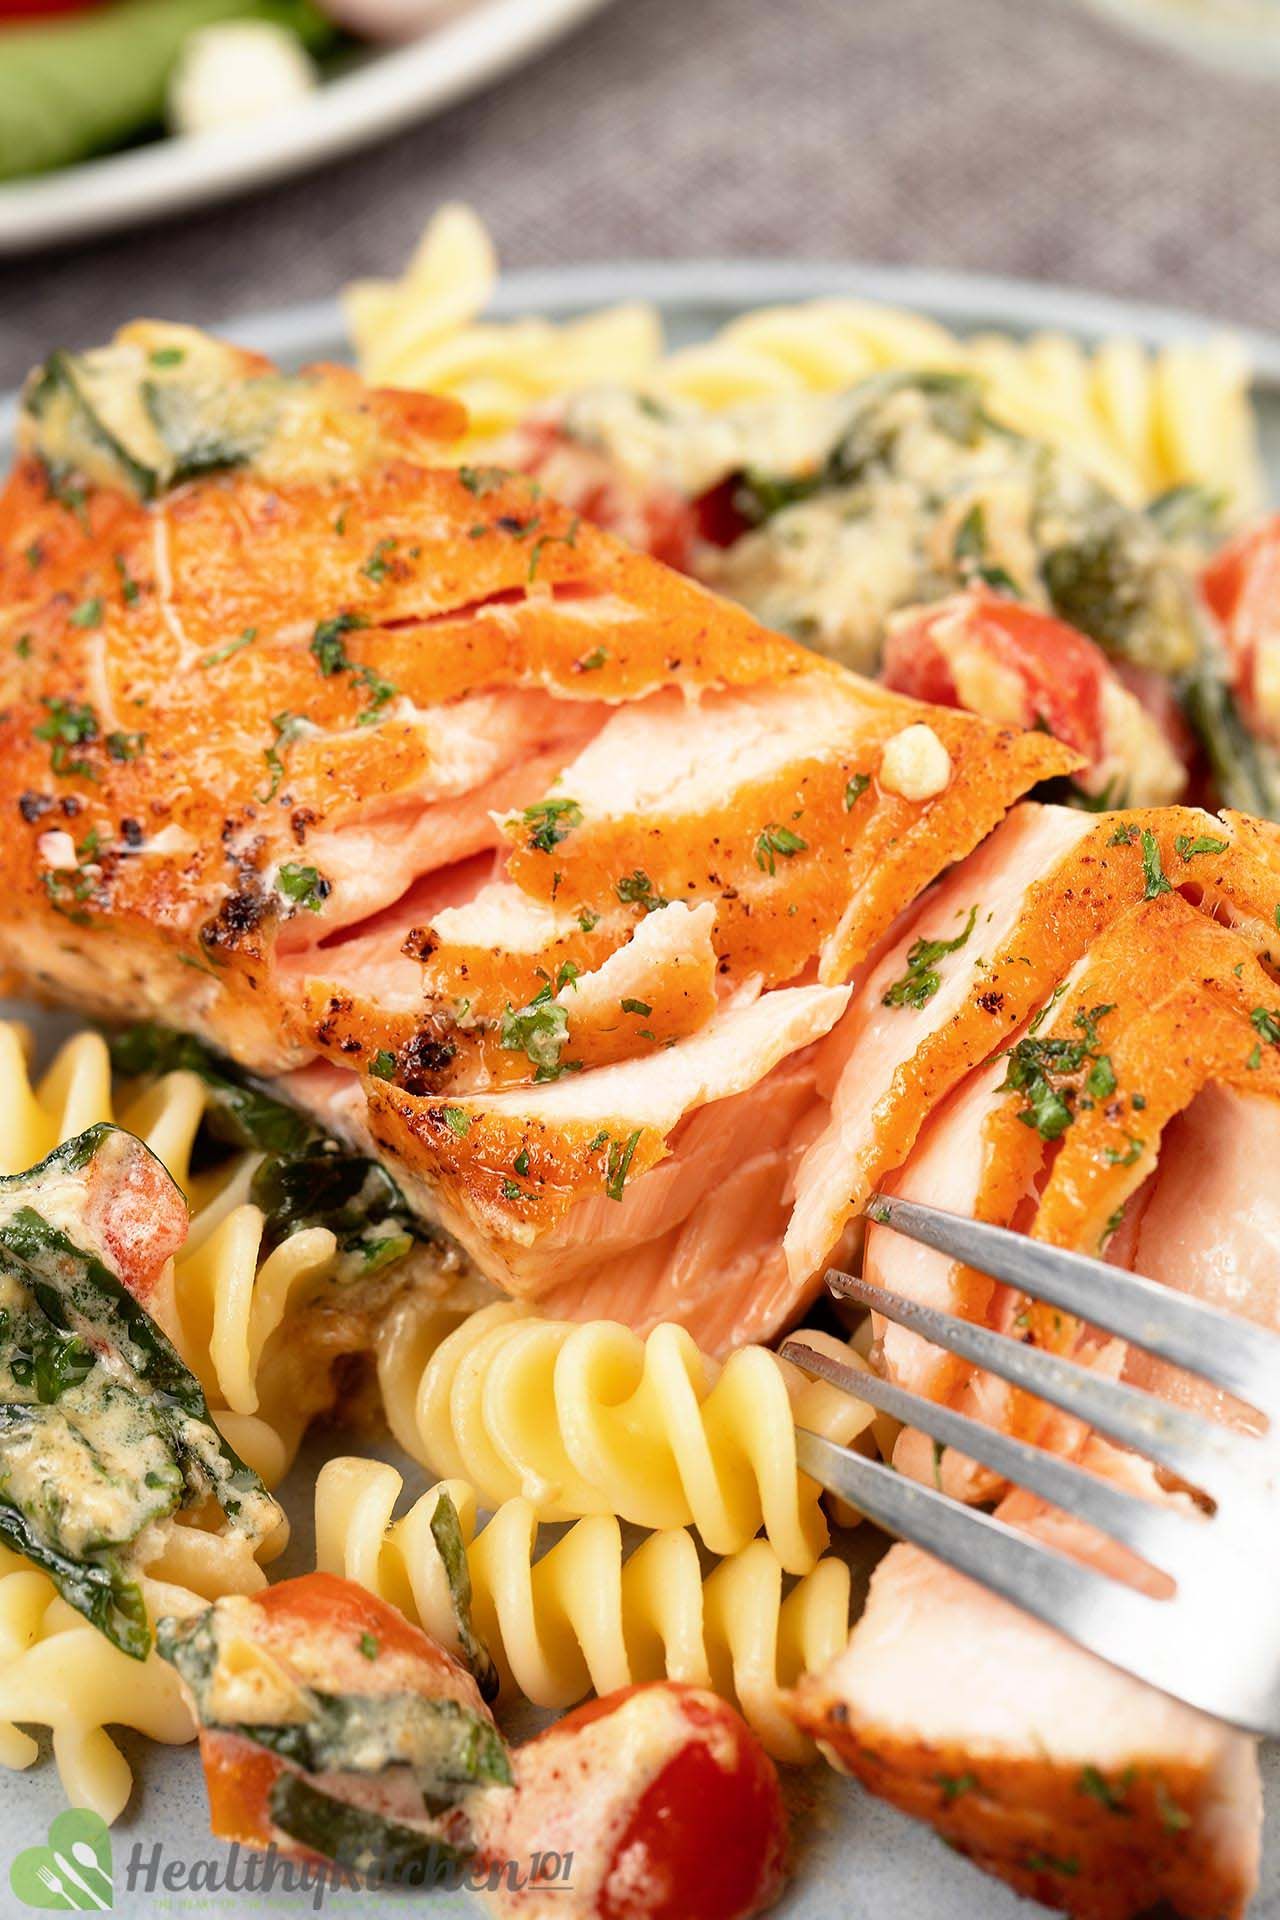 Tuscan Butter Salmon Recipe - An Italian Delish Done in Simple Steps